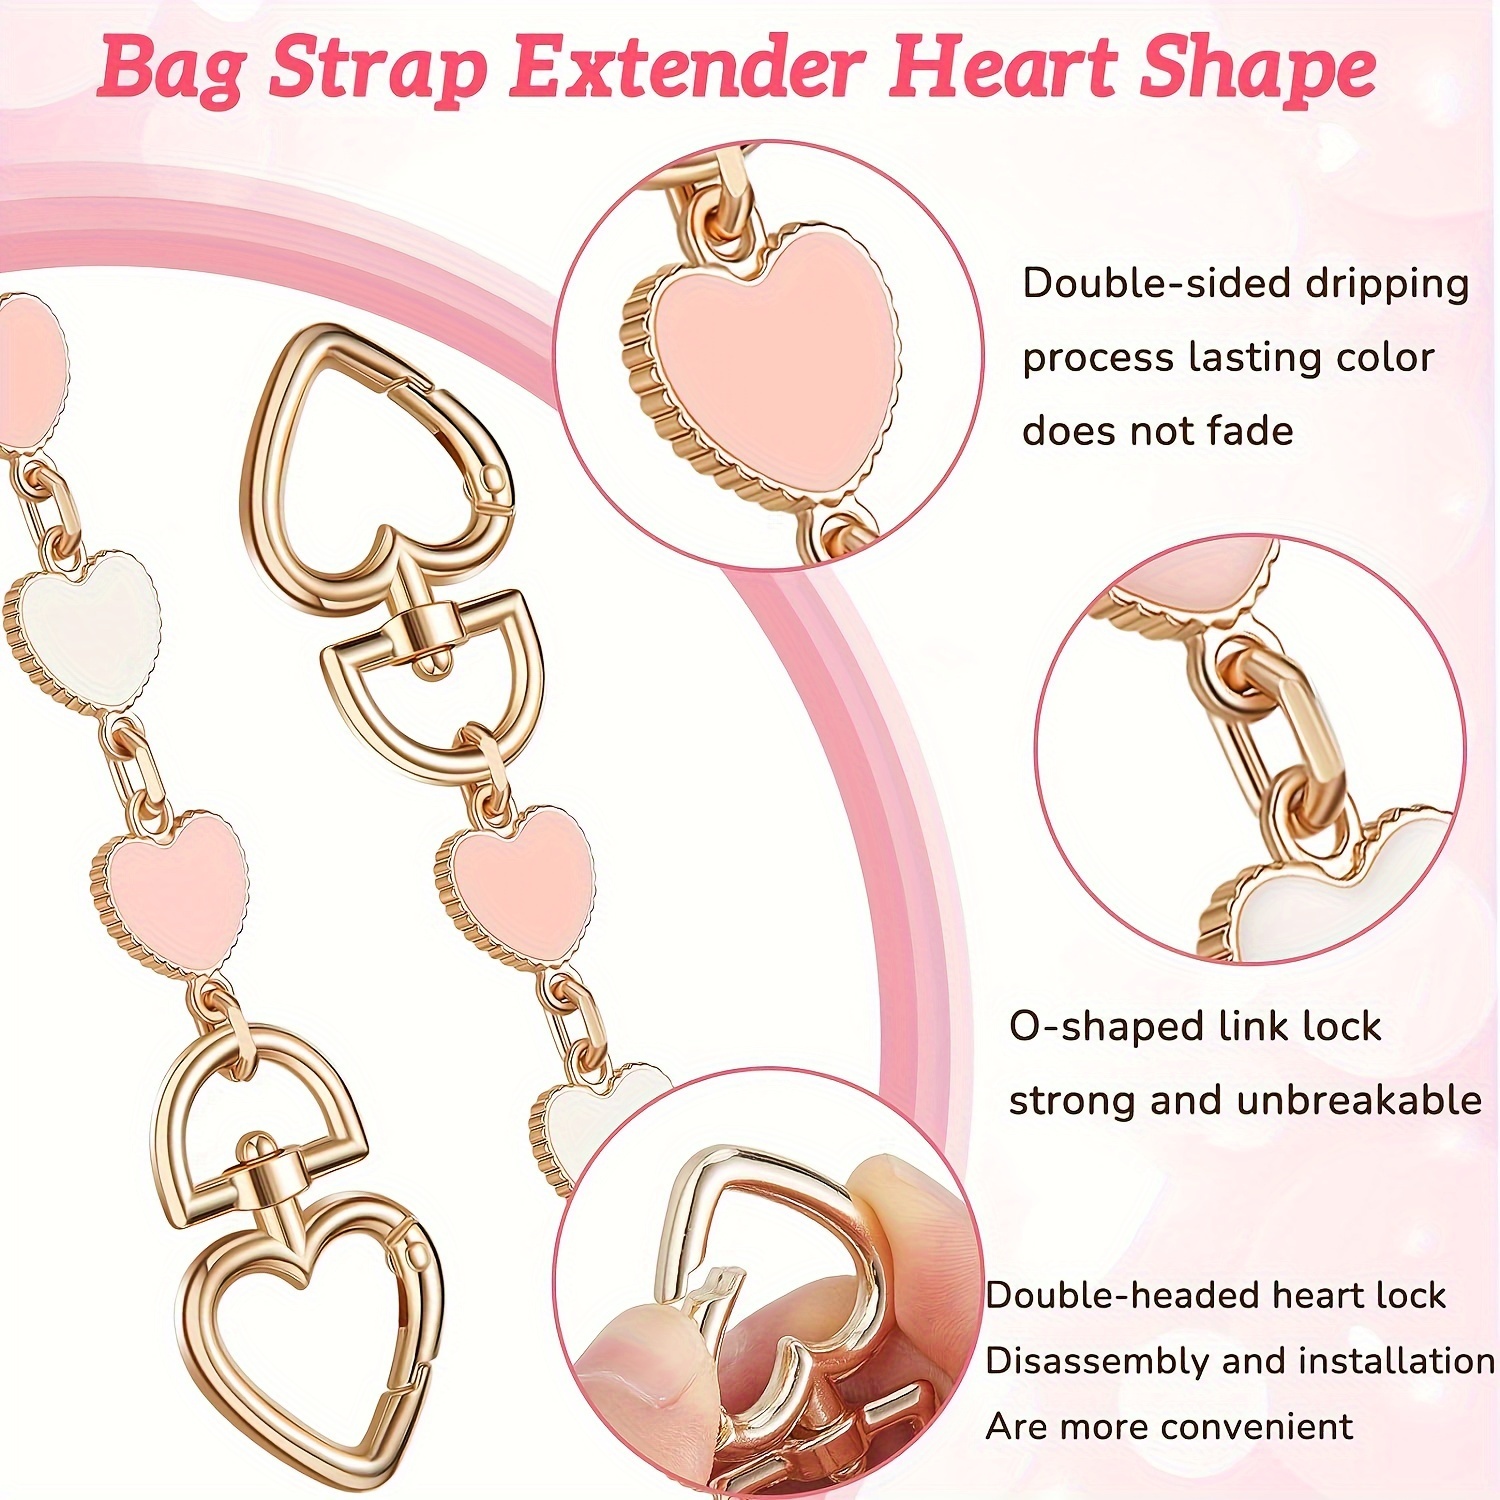  FKKWUOT Purse Strap Extender Heart Shape,Bag Extender For  Coach Bag,Chain Replacement Accessories For Crossbody And Various Styles  Bags